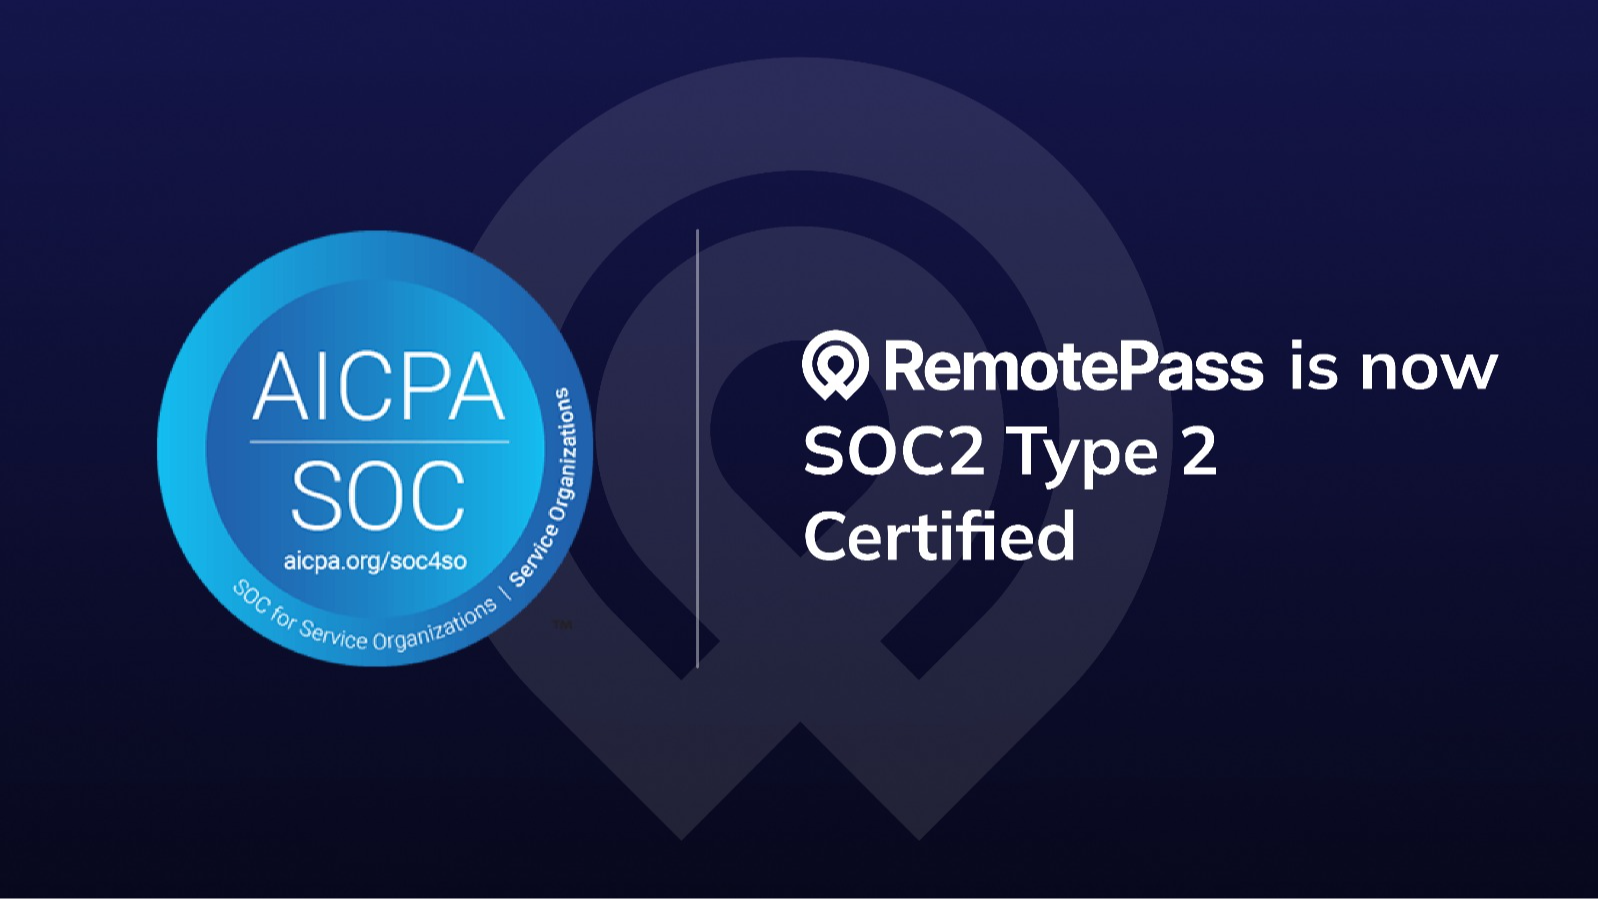 https://adgully.me/post/3766/remotepass-secures-prestigious-soc-2-type-ii-certification